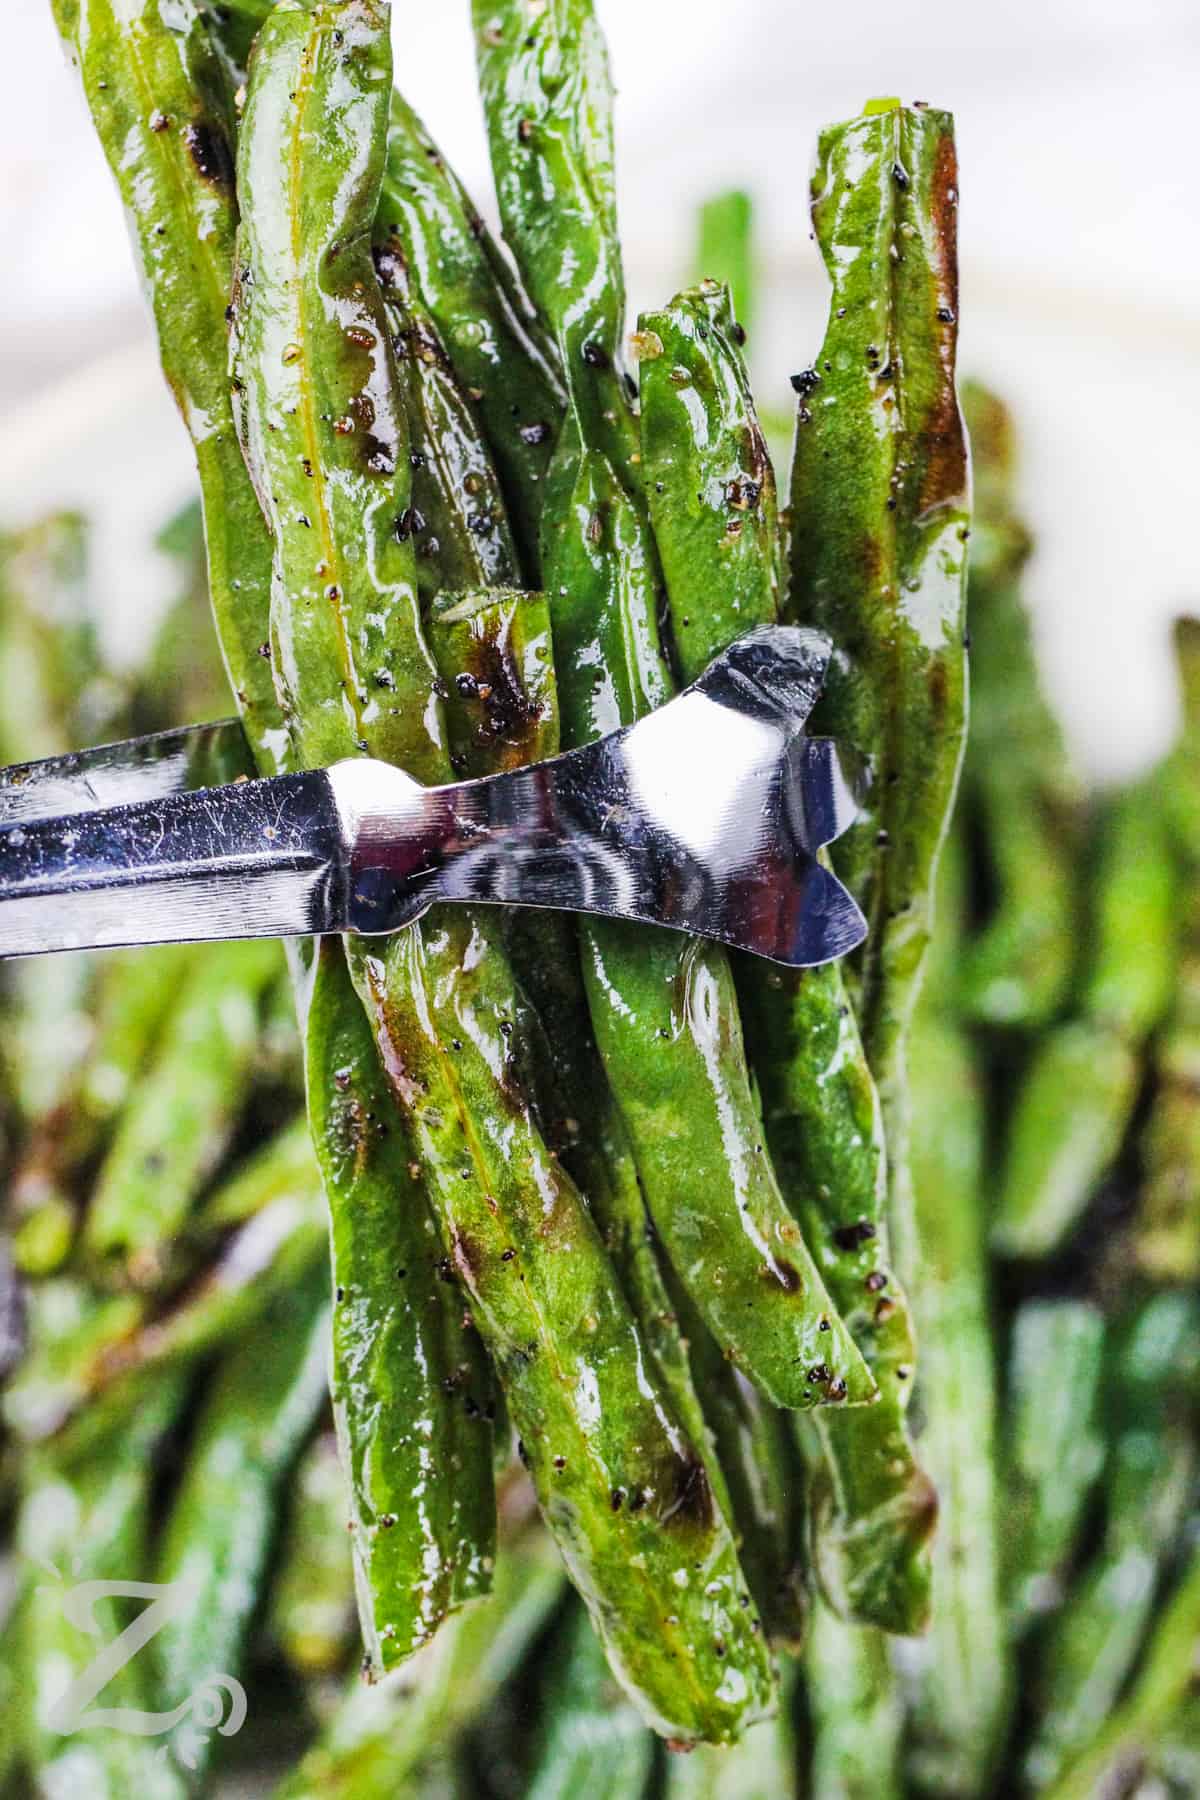 grilled green beans being held up by tongs